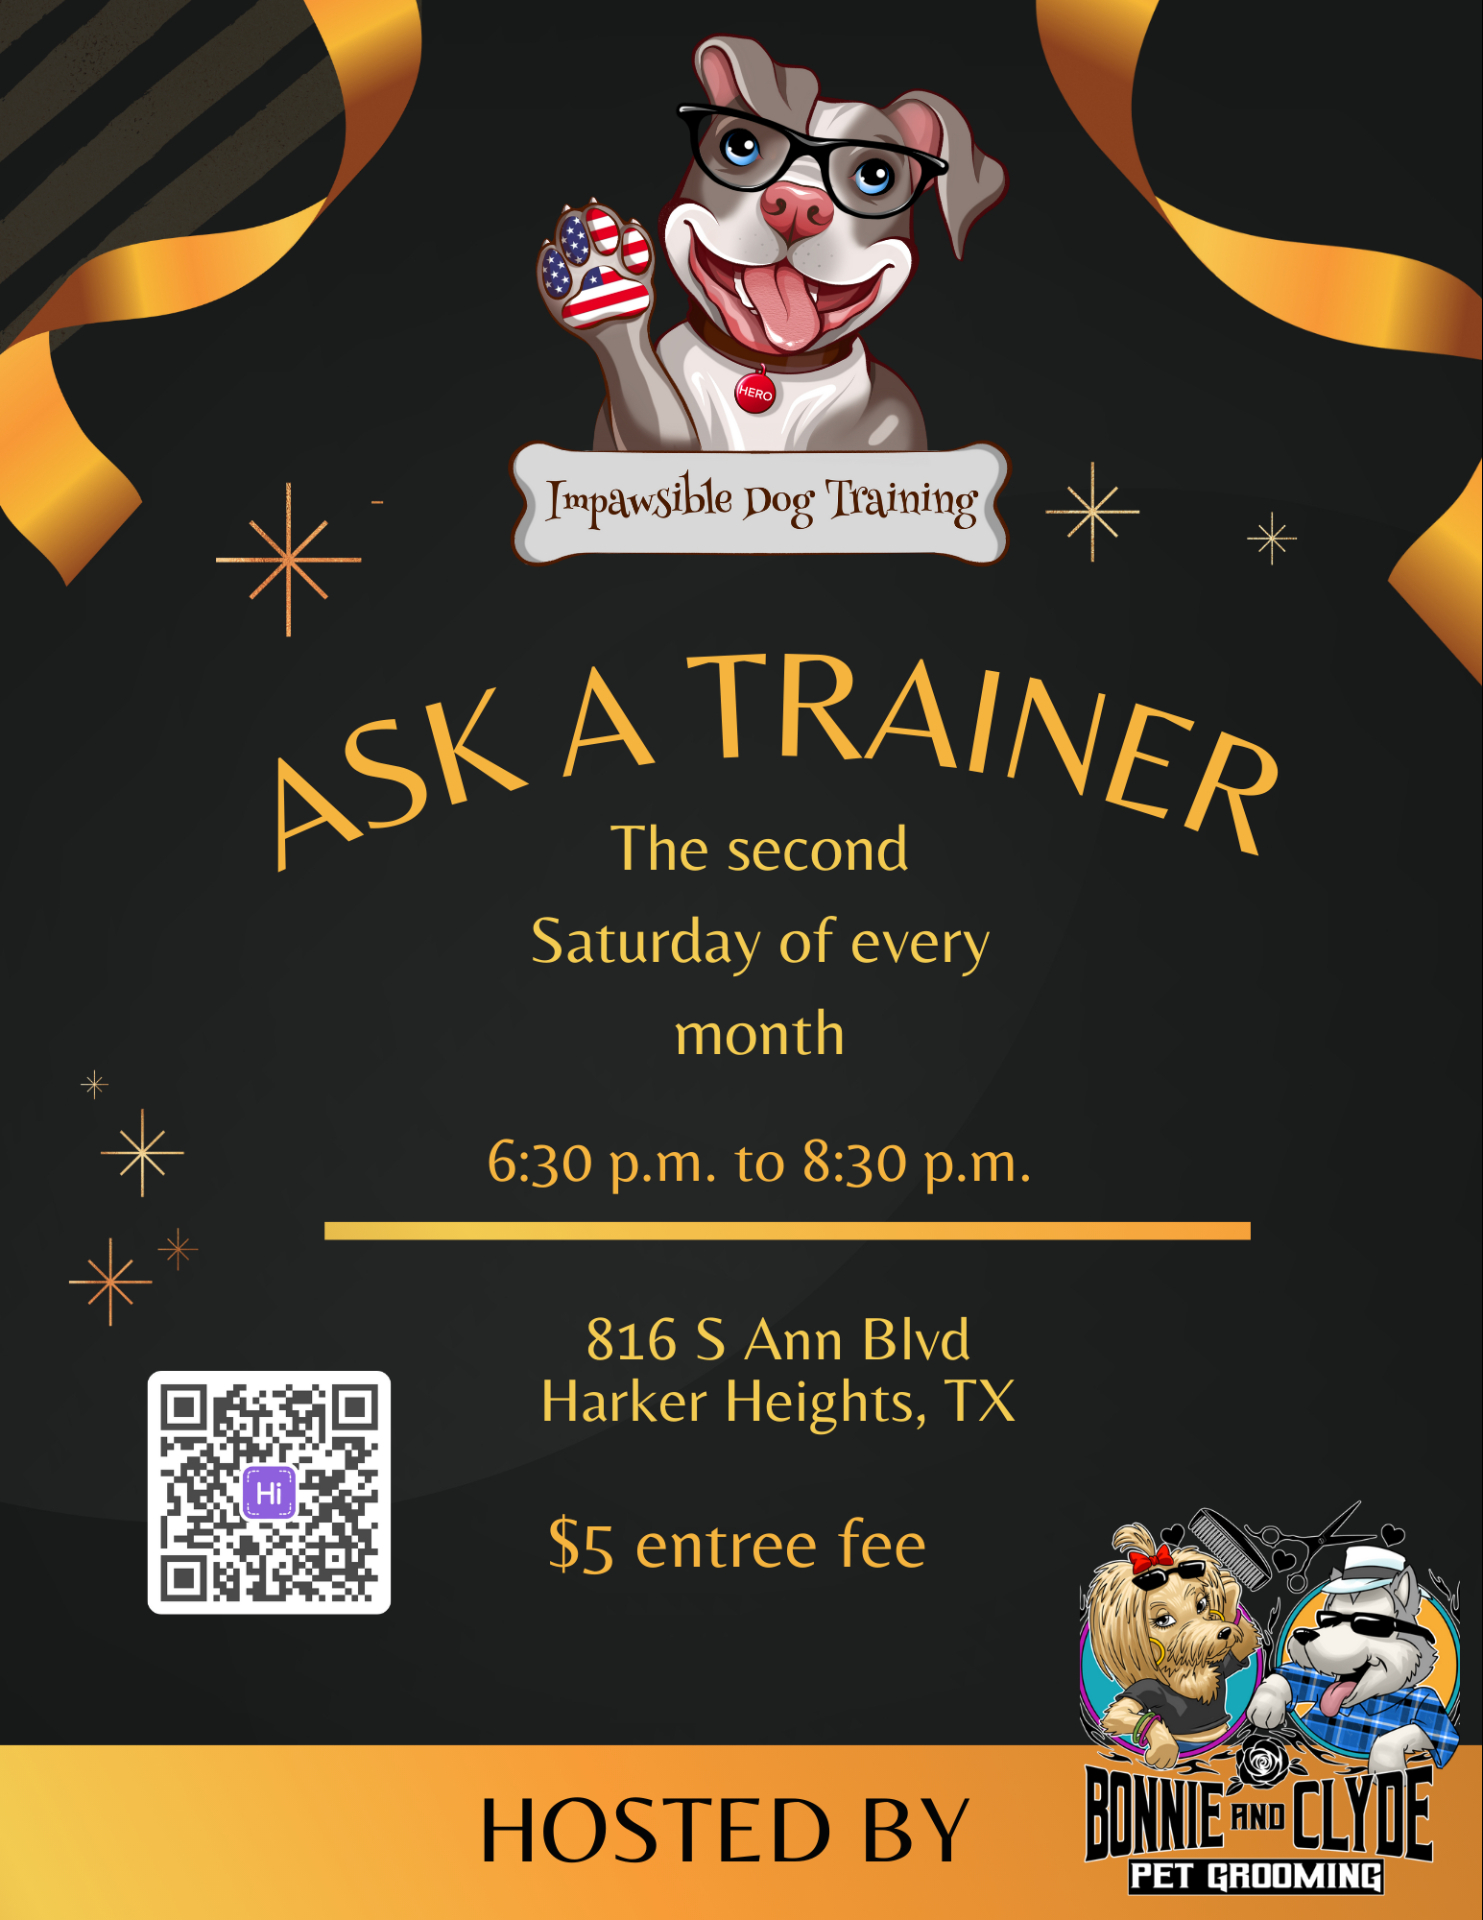 Impawsible Dog Training: Ask a Trainer 